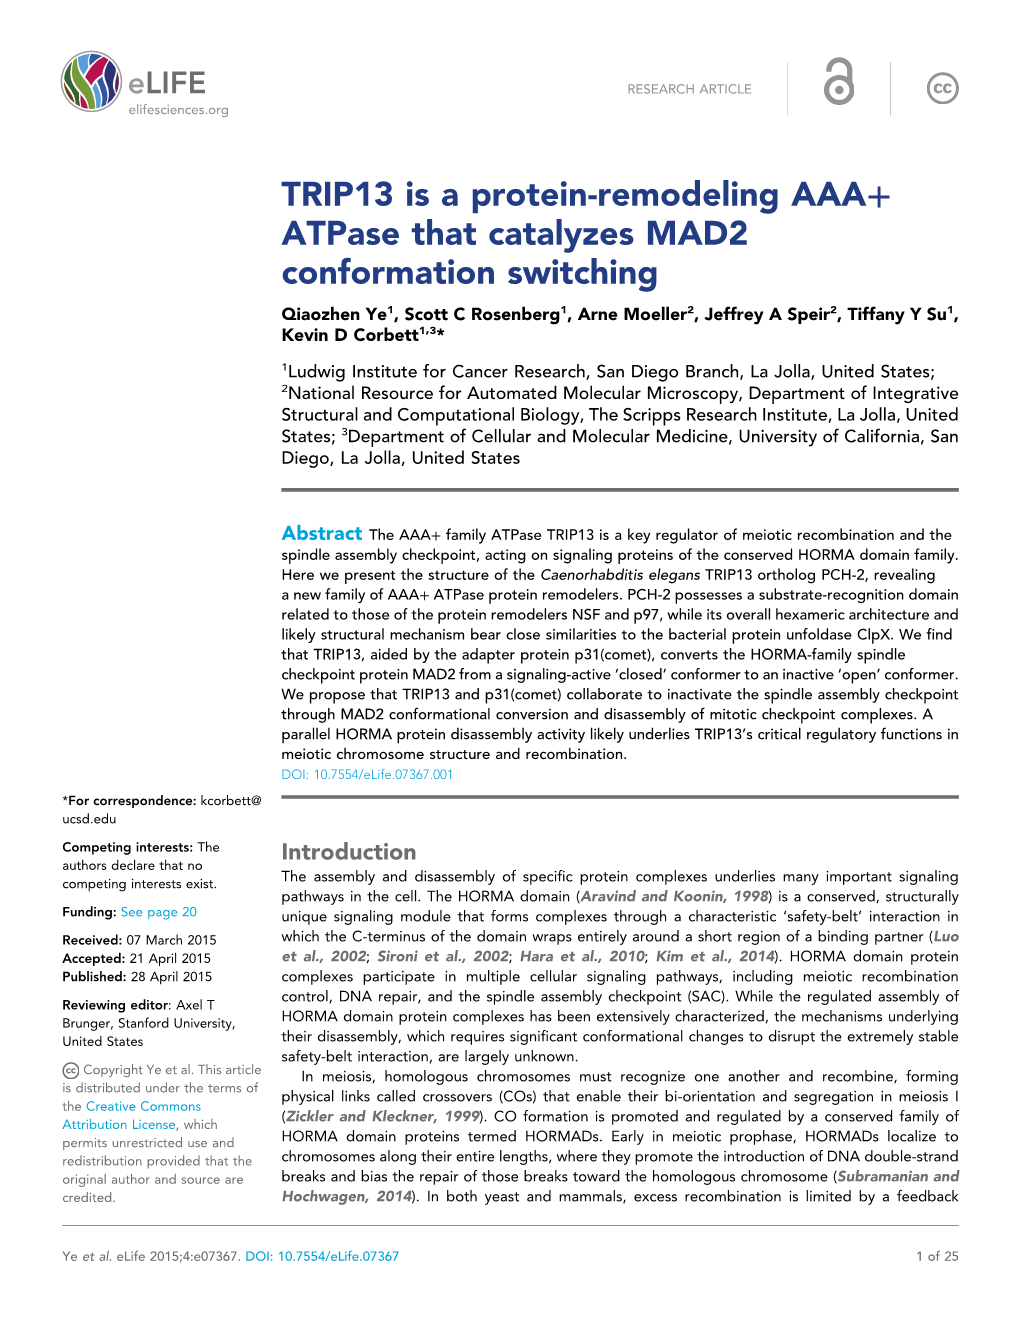 TRIP13 Is a Protein-Remodeling AAA+ Atpase That Catalyzes MAD2